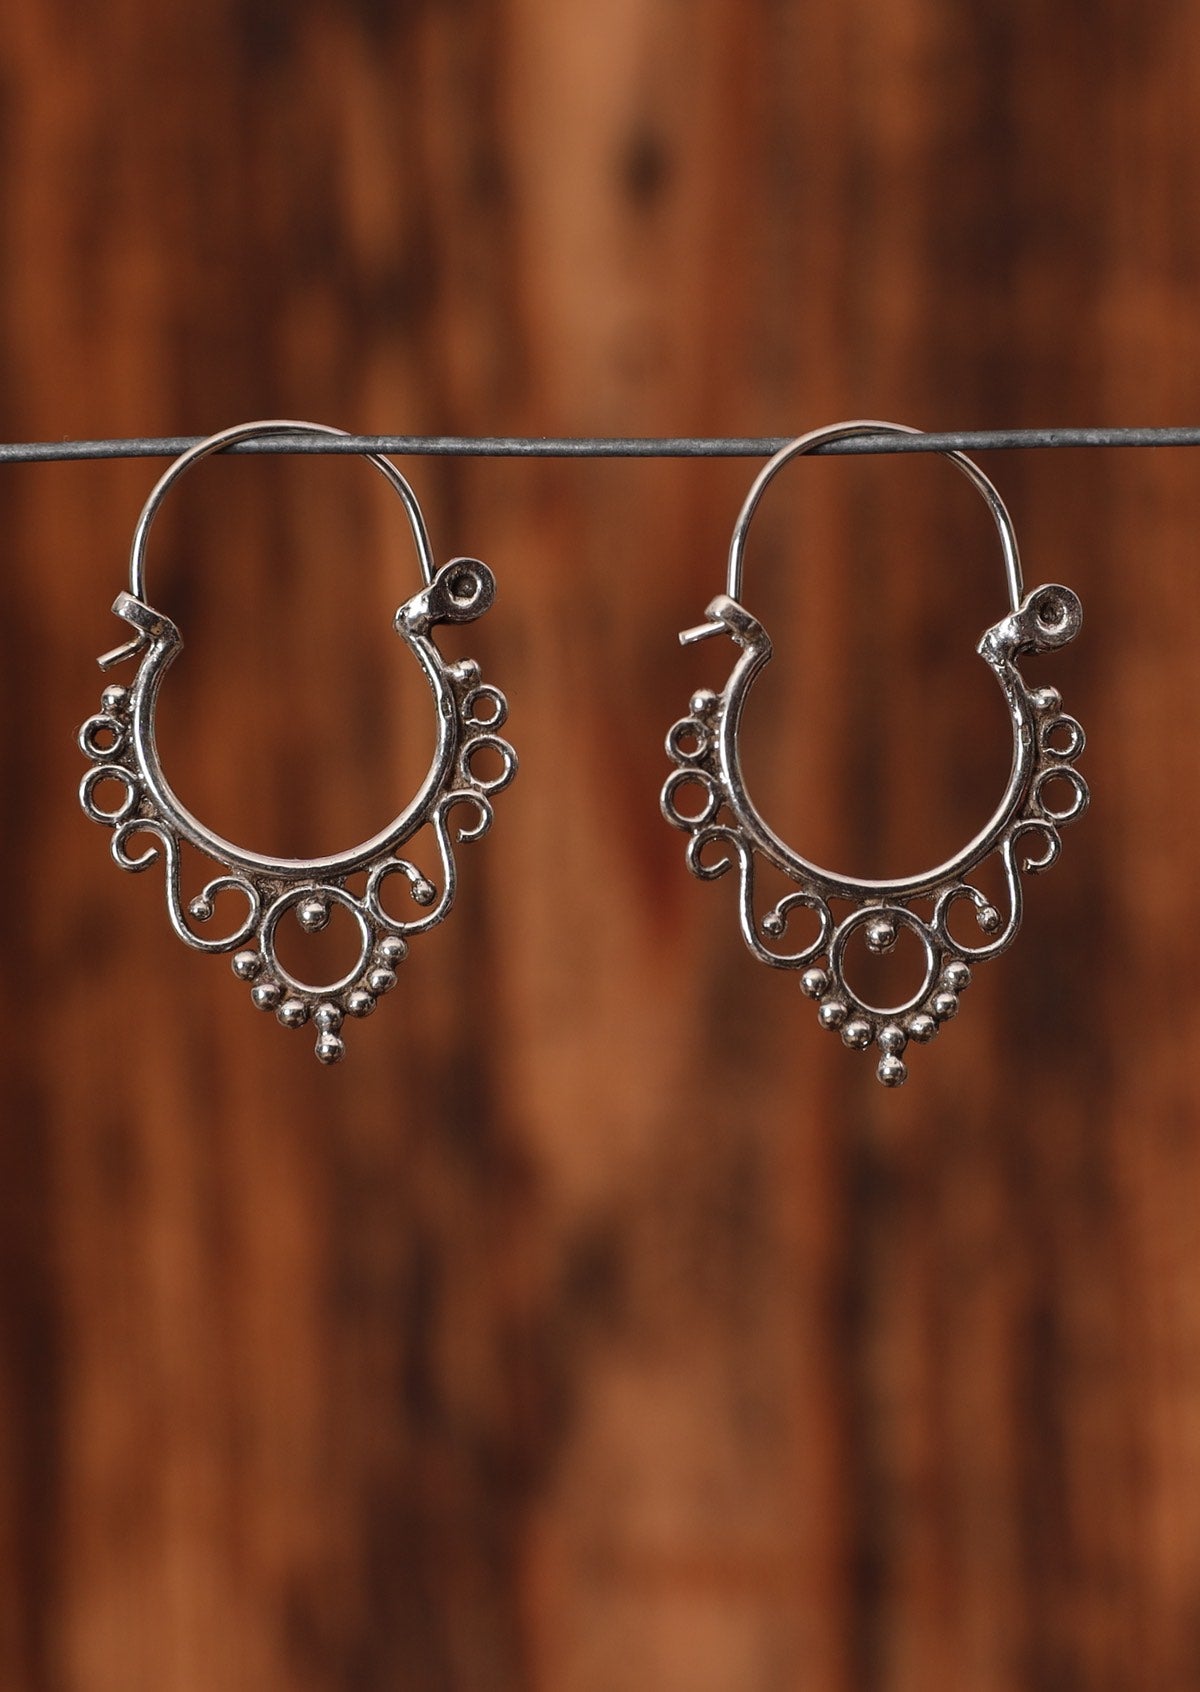 92.5% silver ornate curved earring sitting on a wire for display.